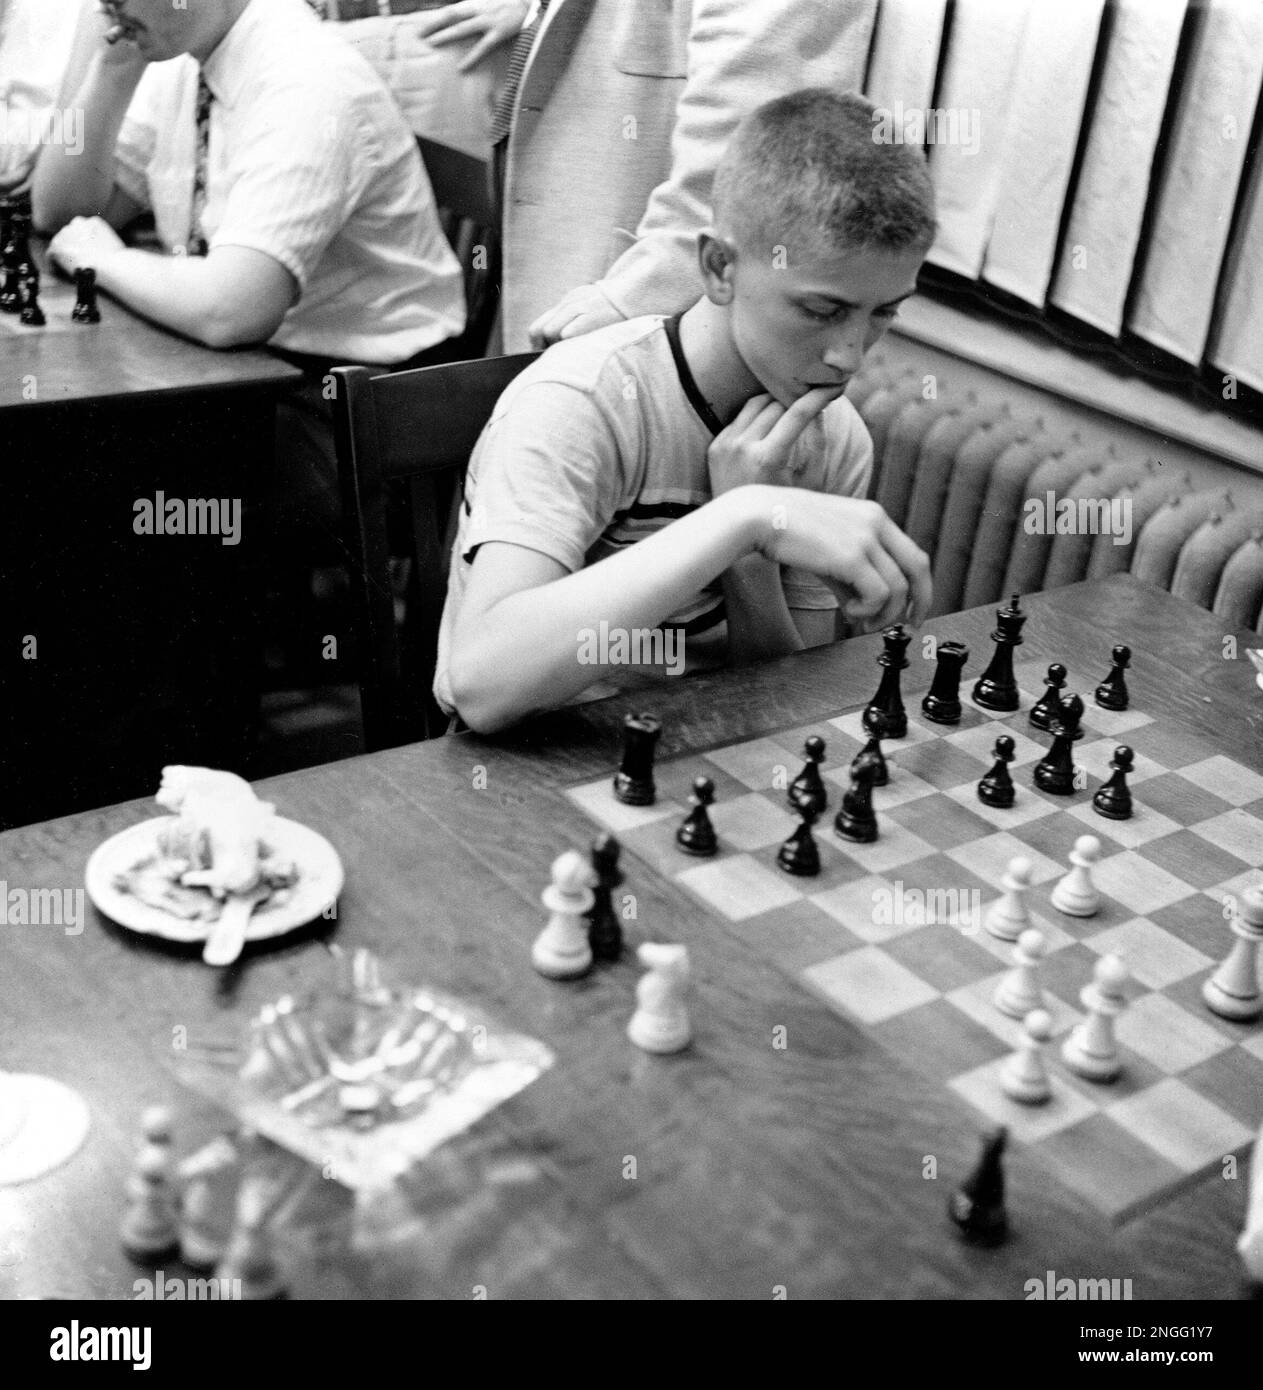 The Yoked Bodies and Minds of Chess Grandmasters